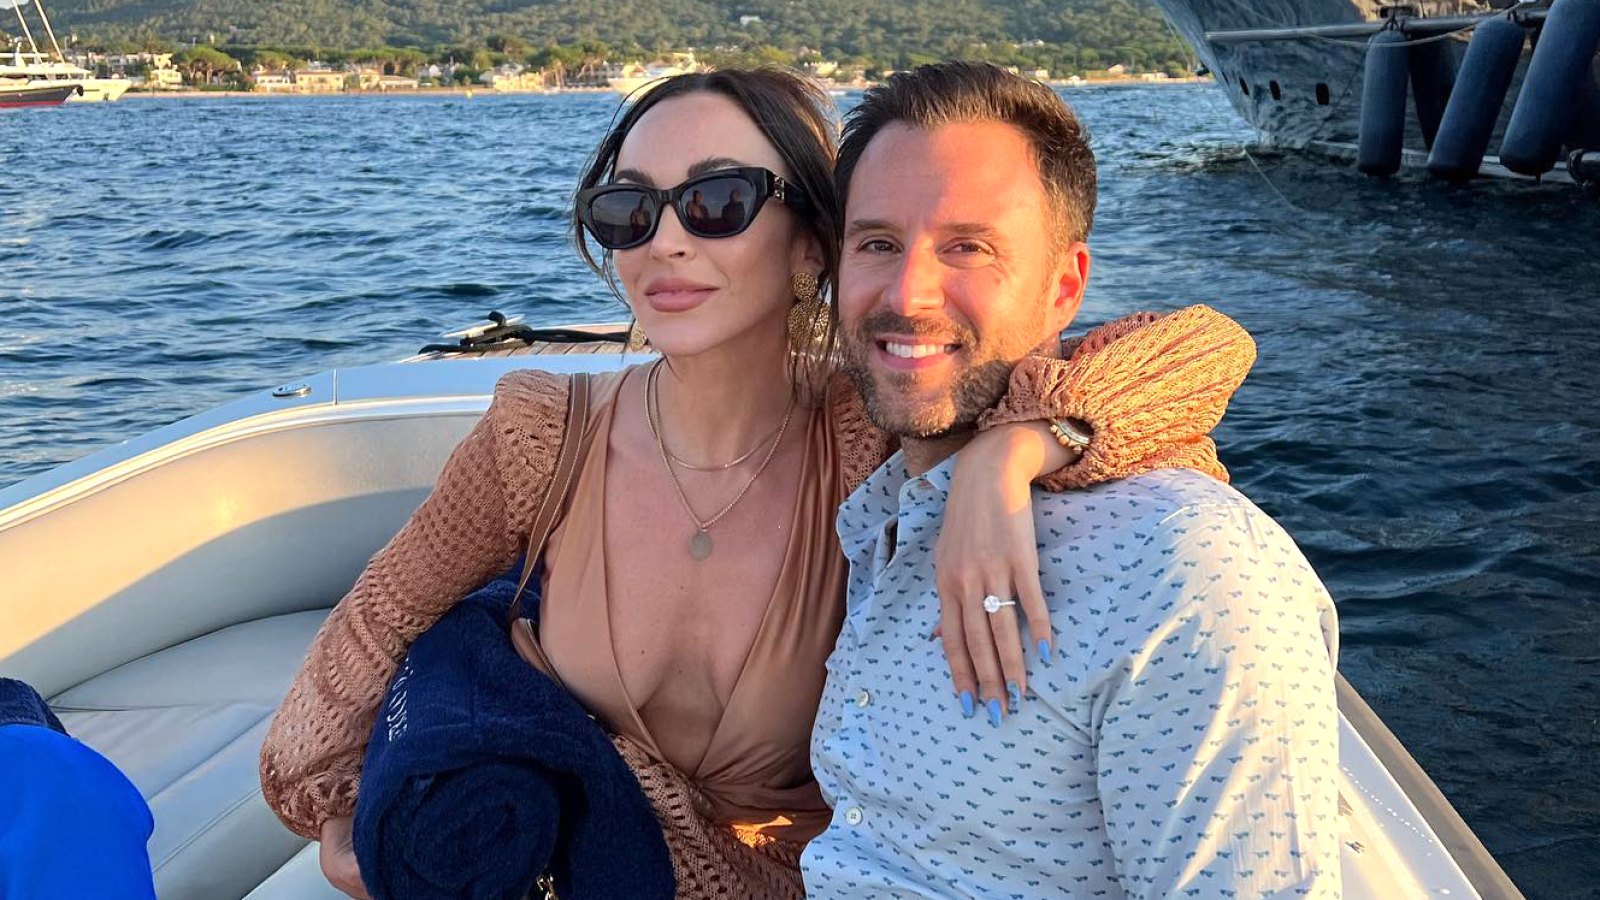 Farrah Aldjufrie in deep V neck beige dress and black sunglasses puts her arm around Alex Manos wearing a button down while riding on a boat with water in background